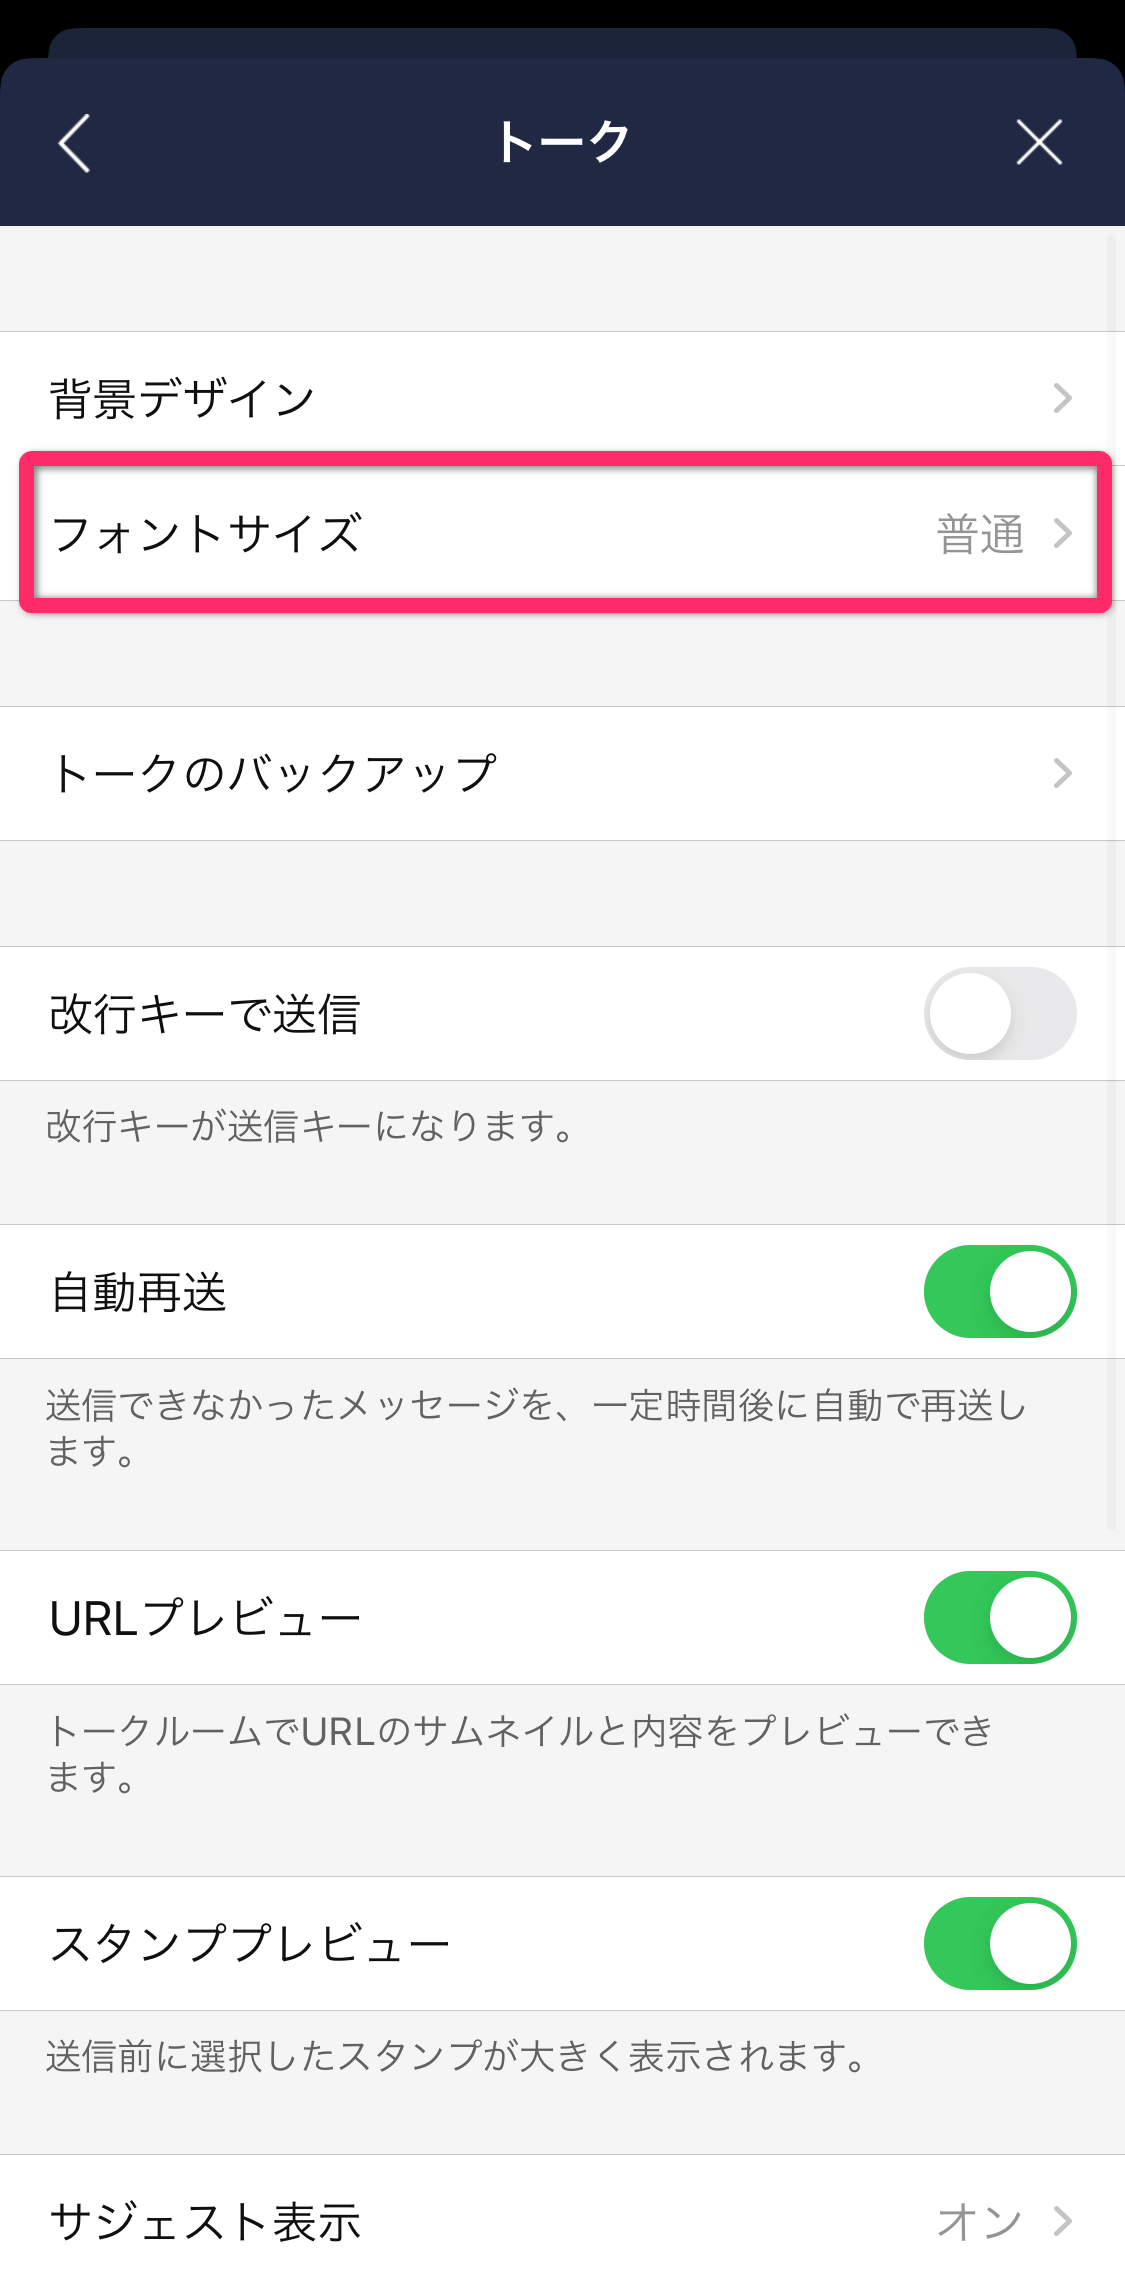 Line 文字の大きさ フォントサイズ を変更する方法 Iphone Android Pc Appliv Topics